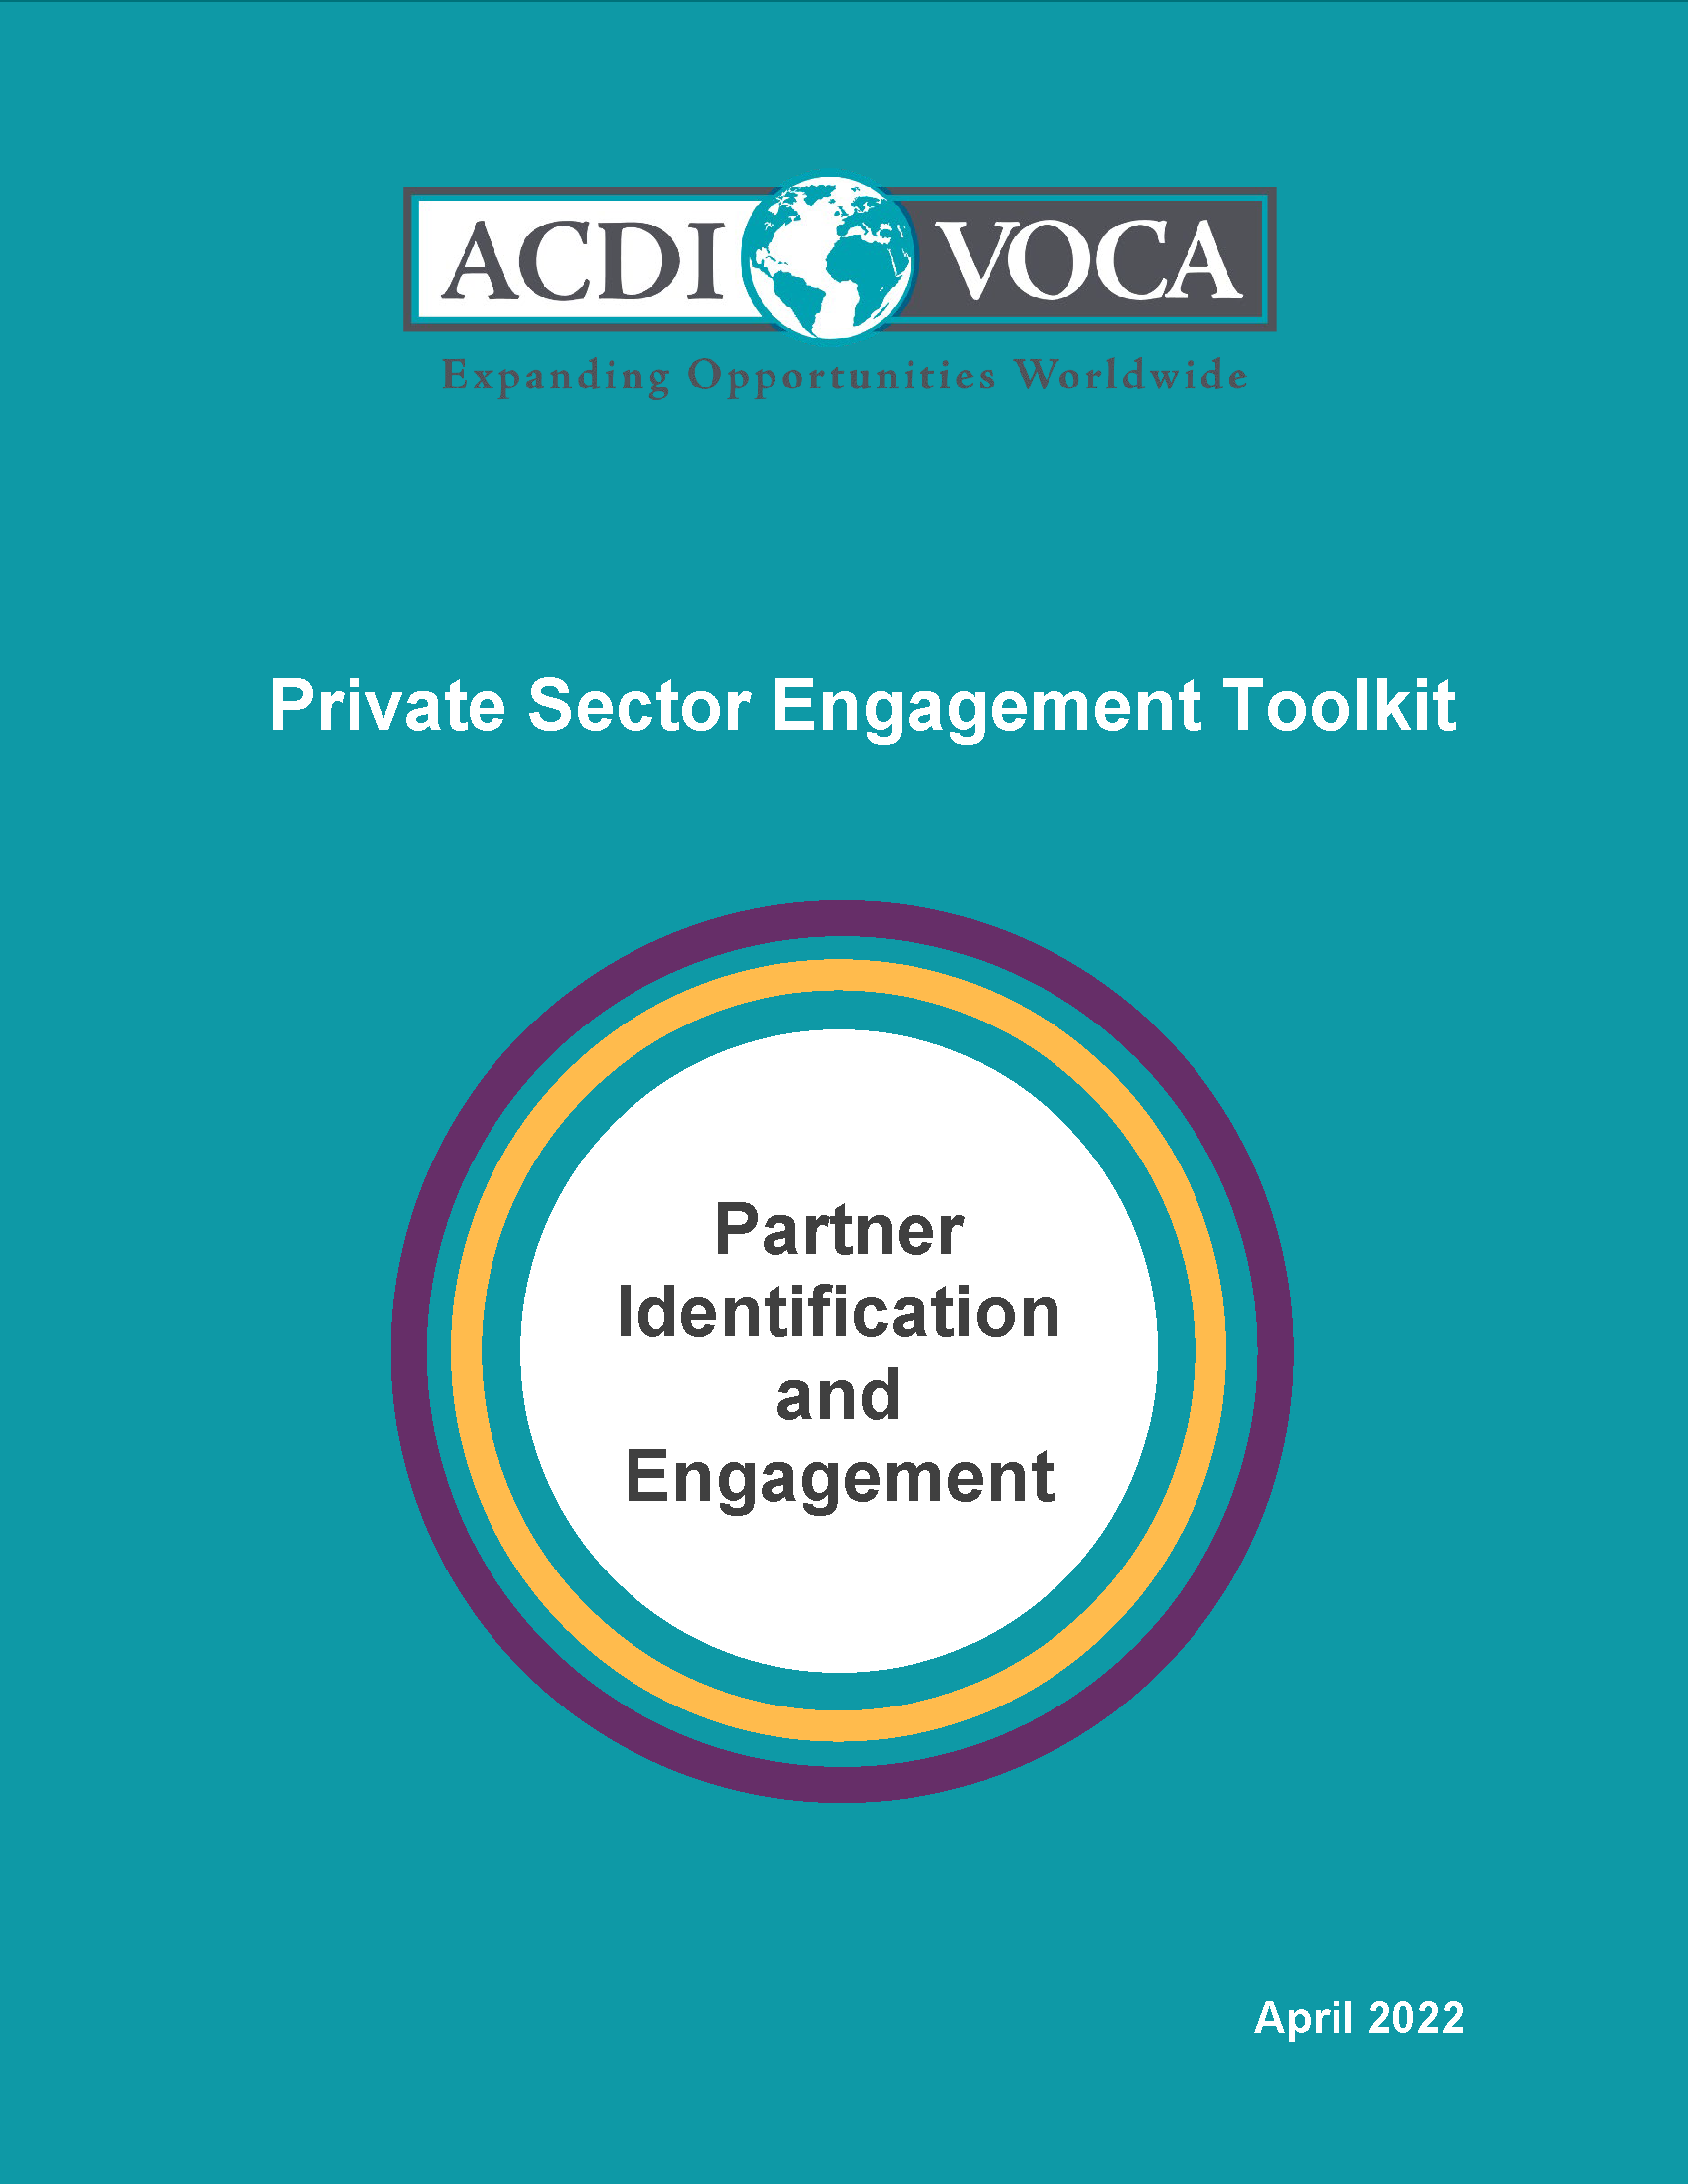 Cover page for Private Sector Engagement Toolkit